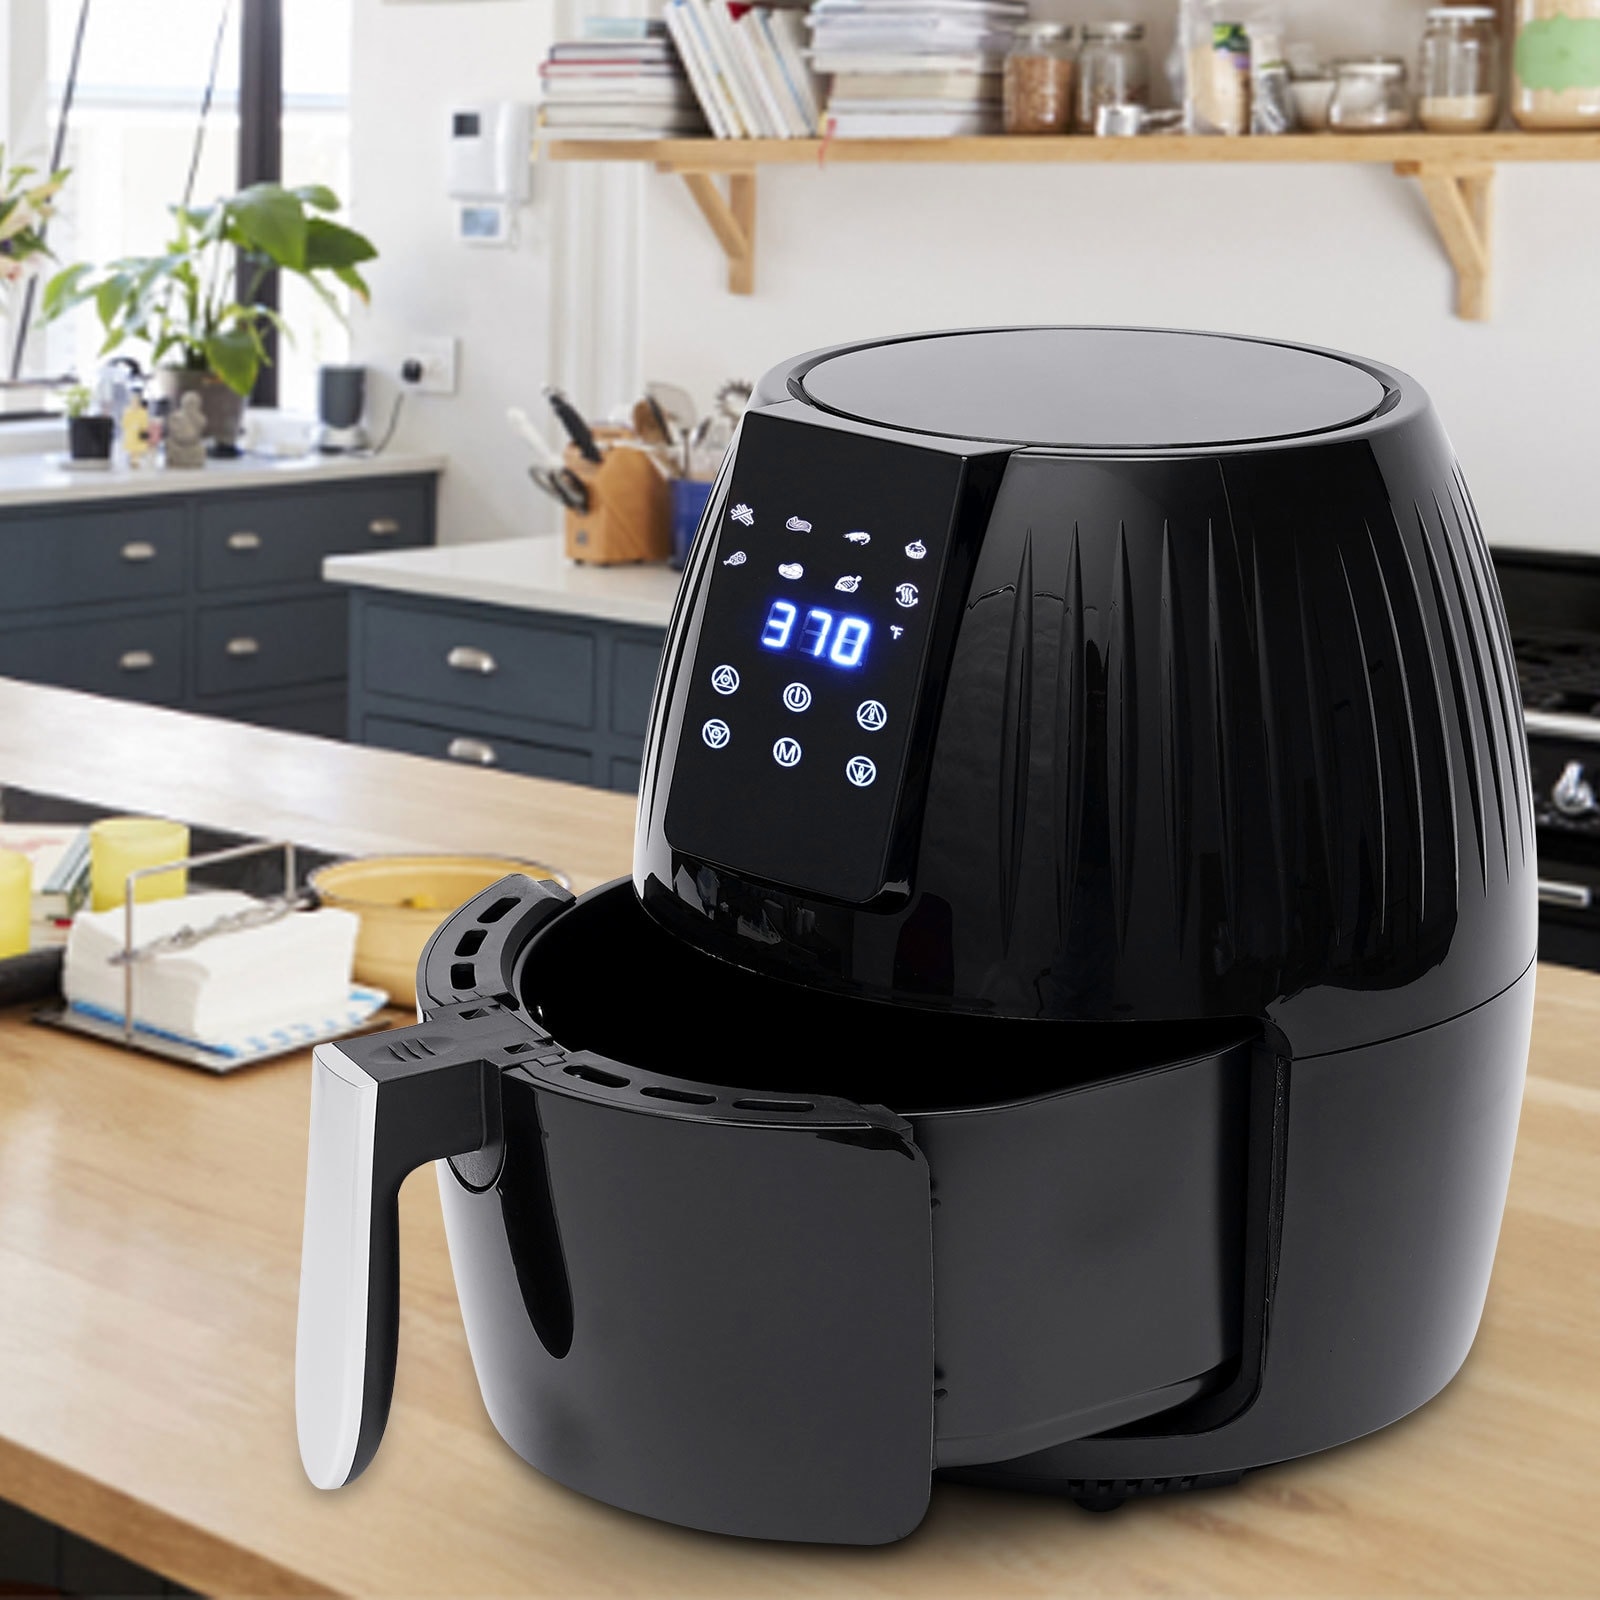 https://ak1.ostkcdn.com/images/products/is/images/direct/8a0a06c83843cf479b4413495c7f6fb55cb121ab/Smart-Digital-Panel-Touch-Control-Electric-Air-Fryer.jpg